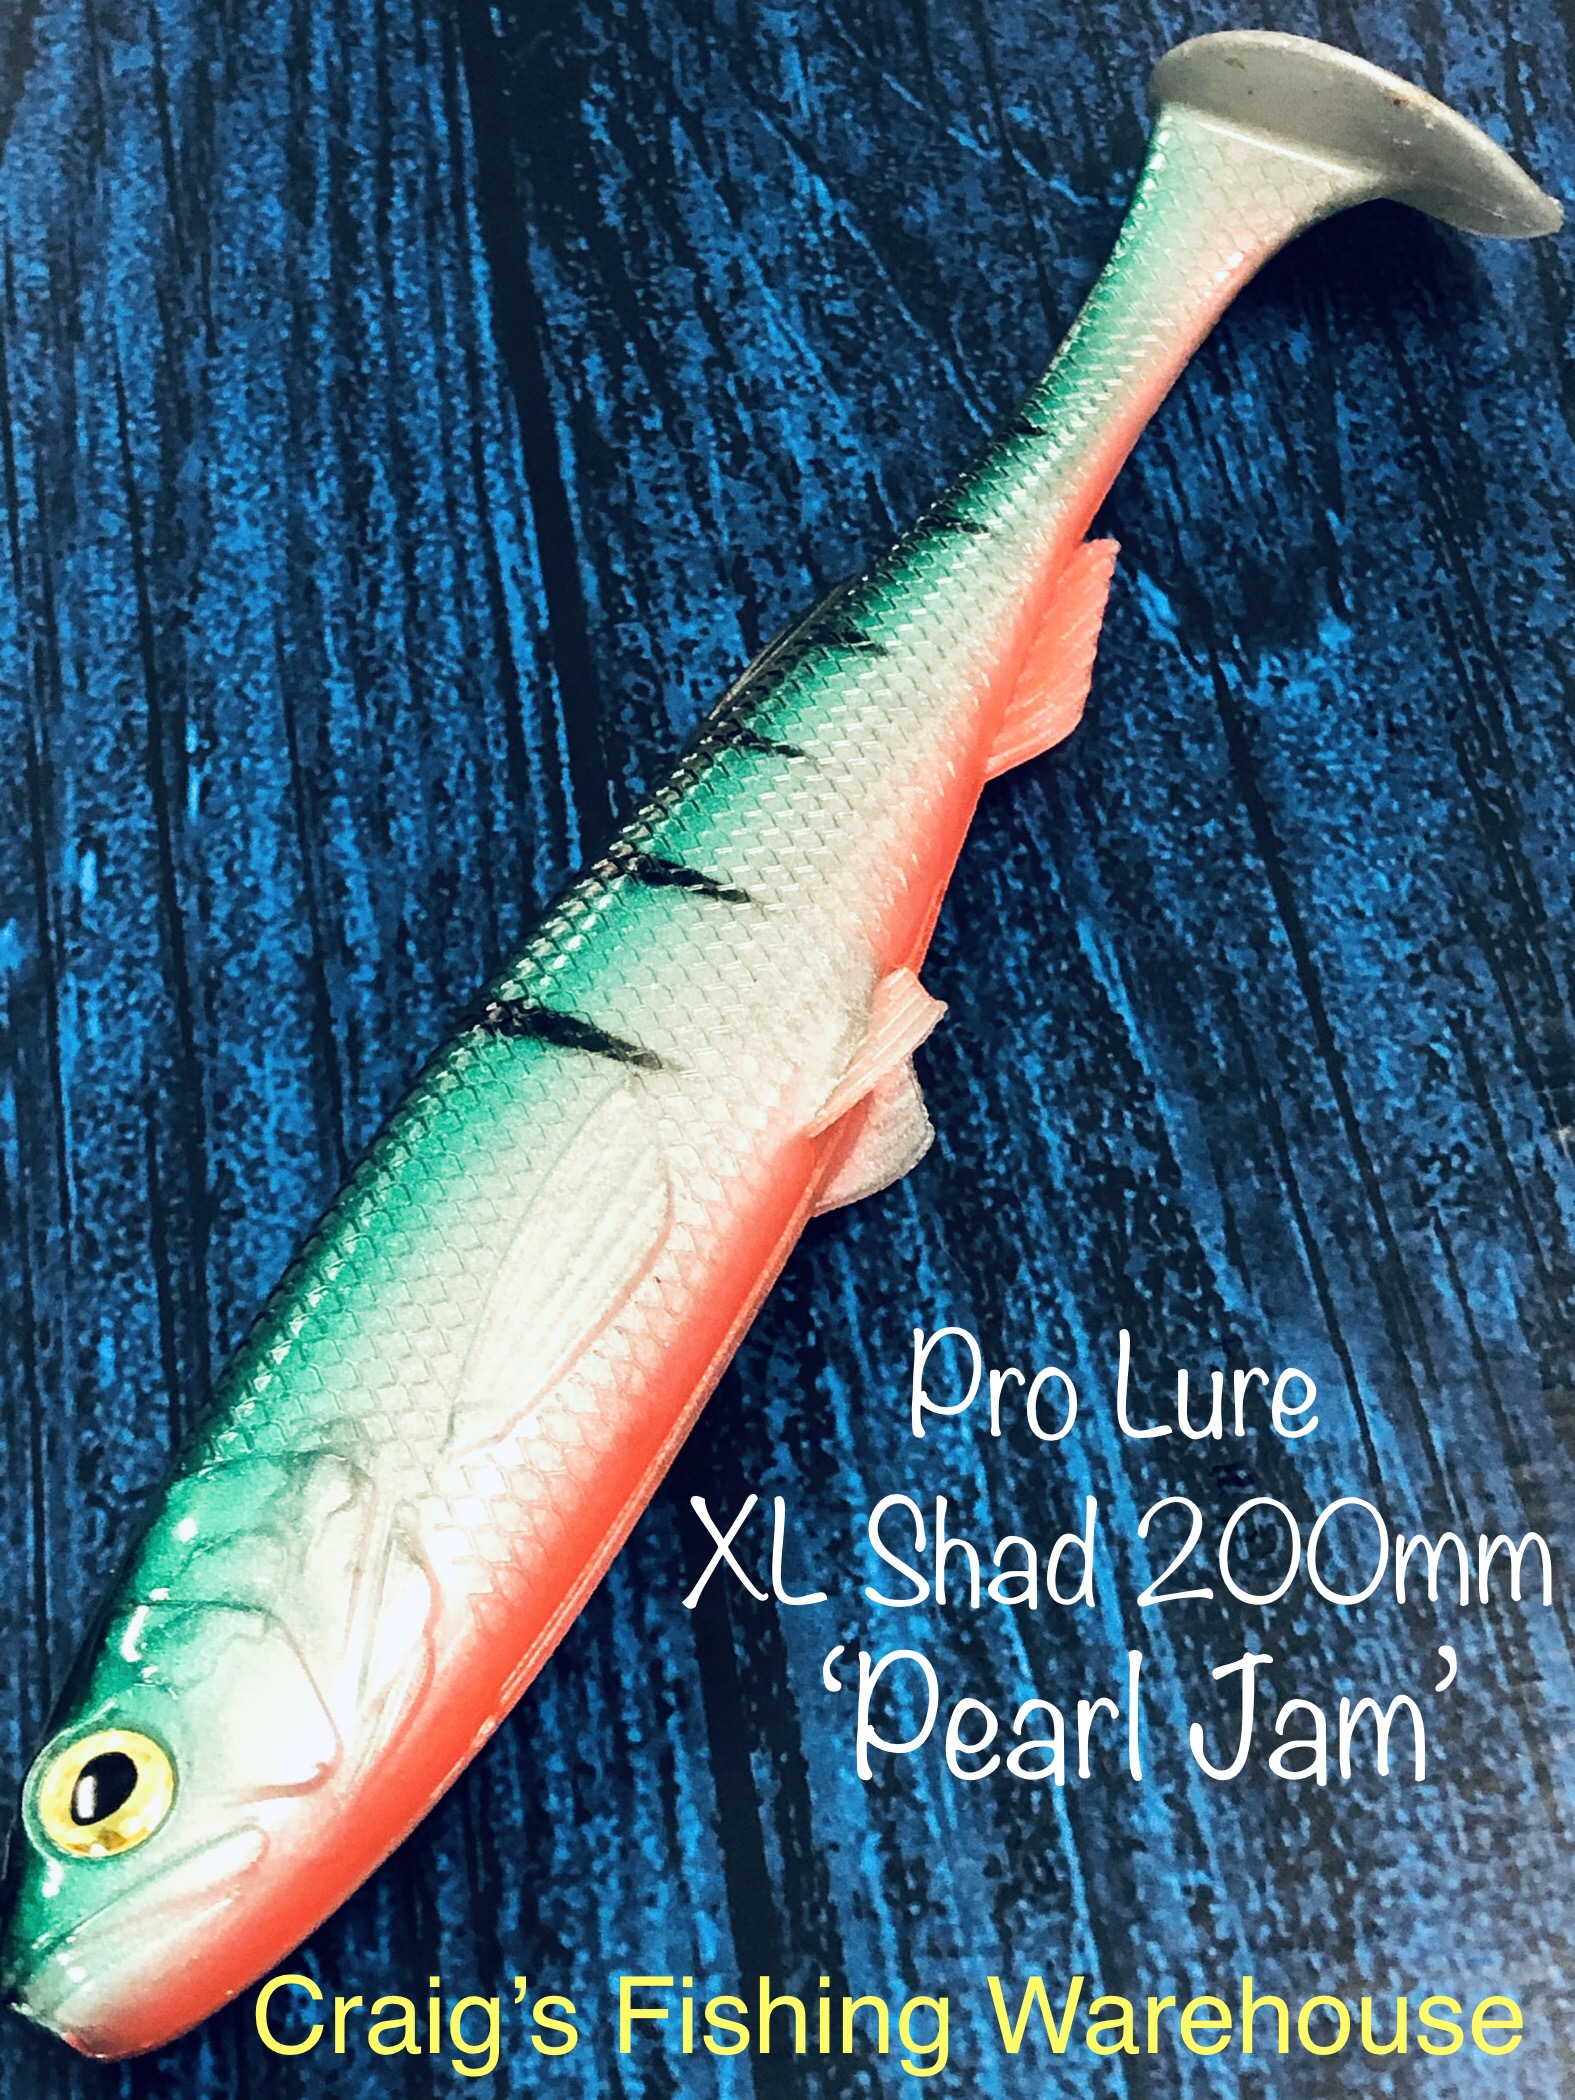 Pro Lure XL Shad 200mm 'Pearl Jam